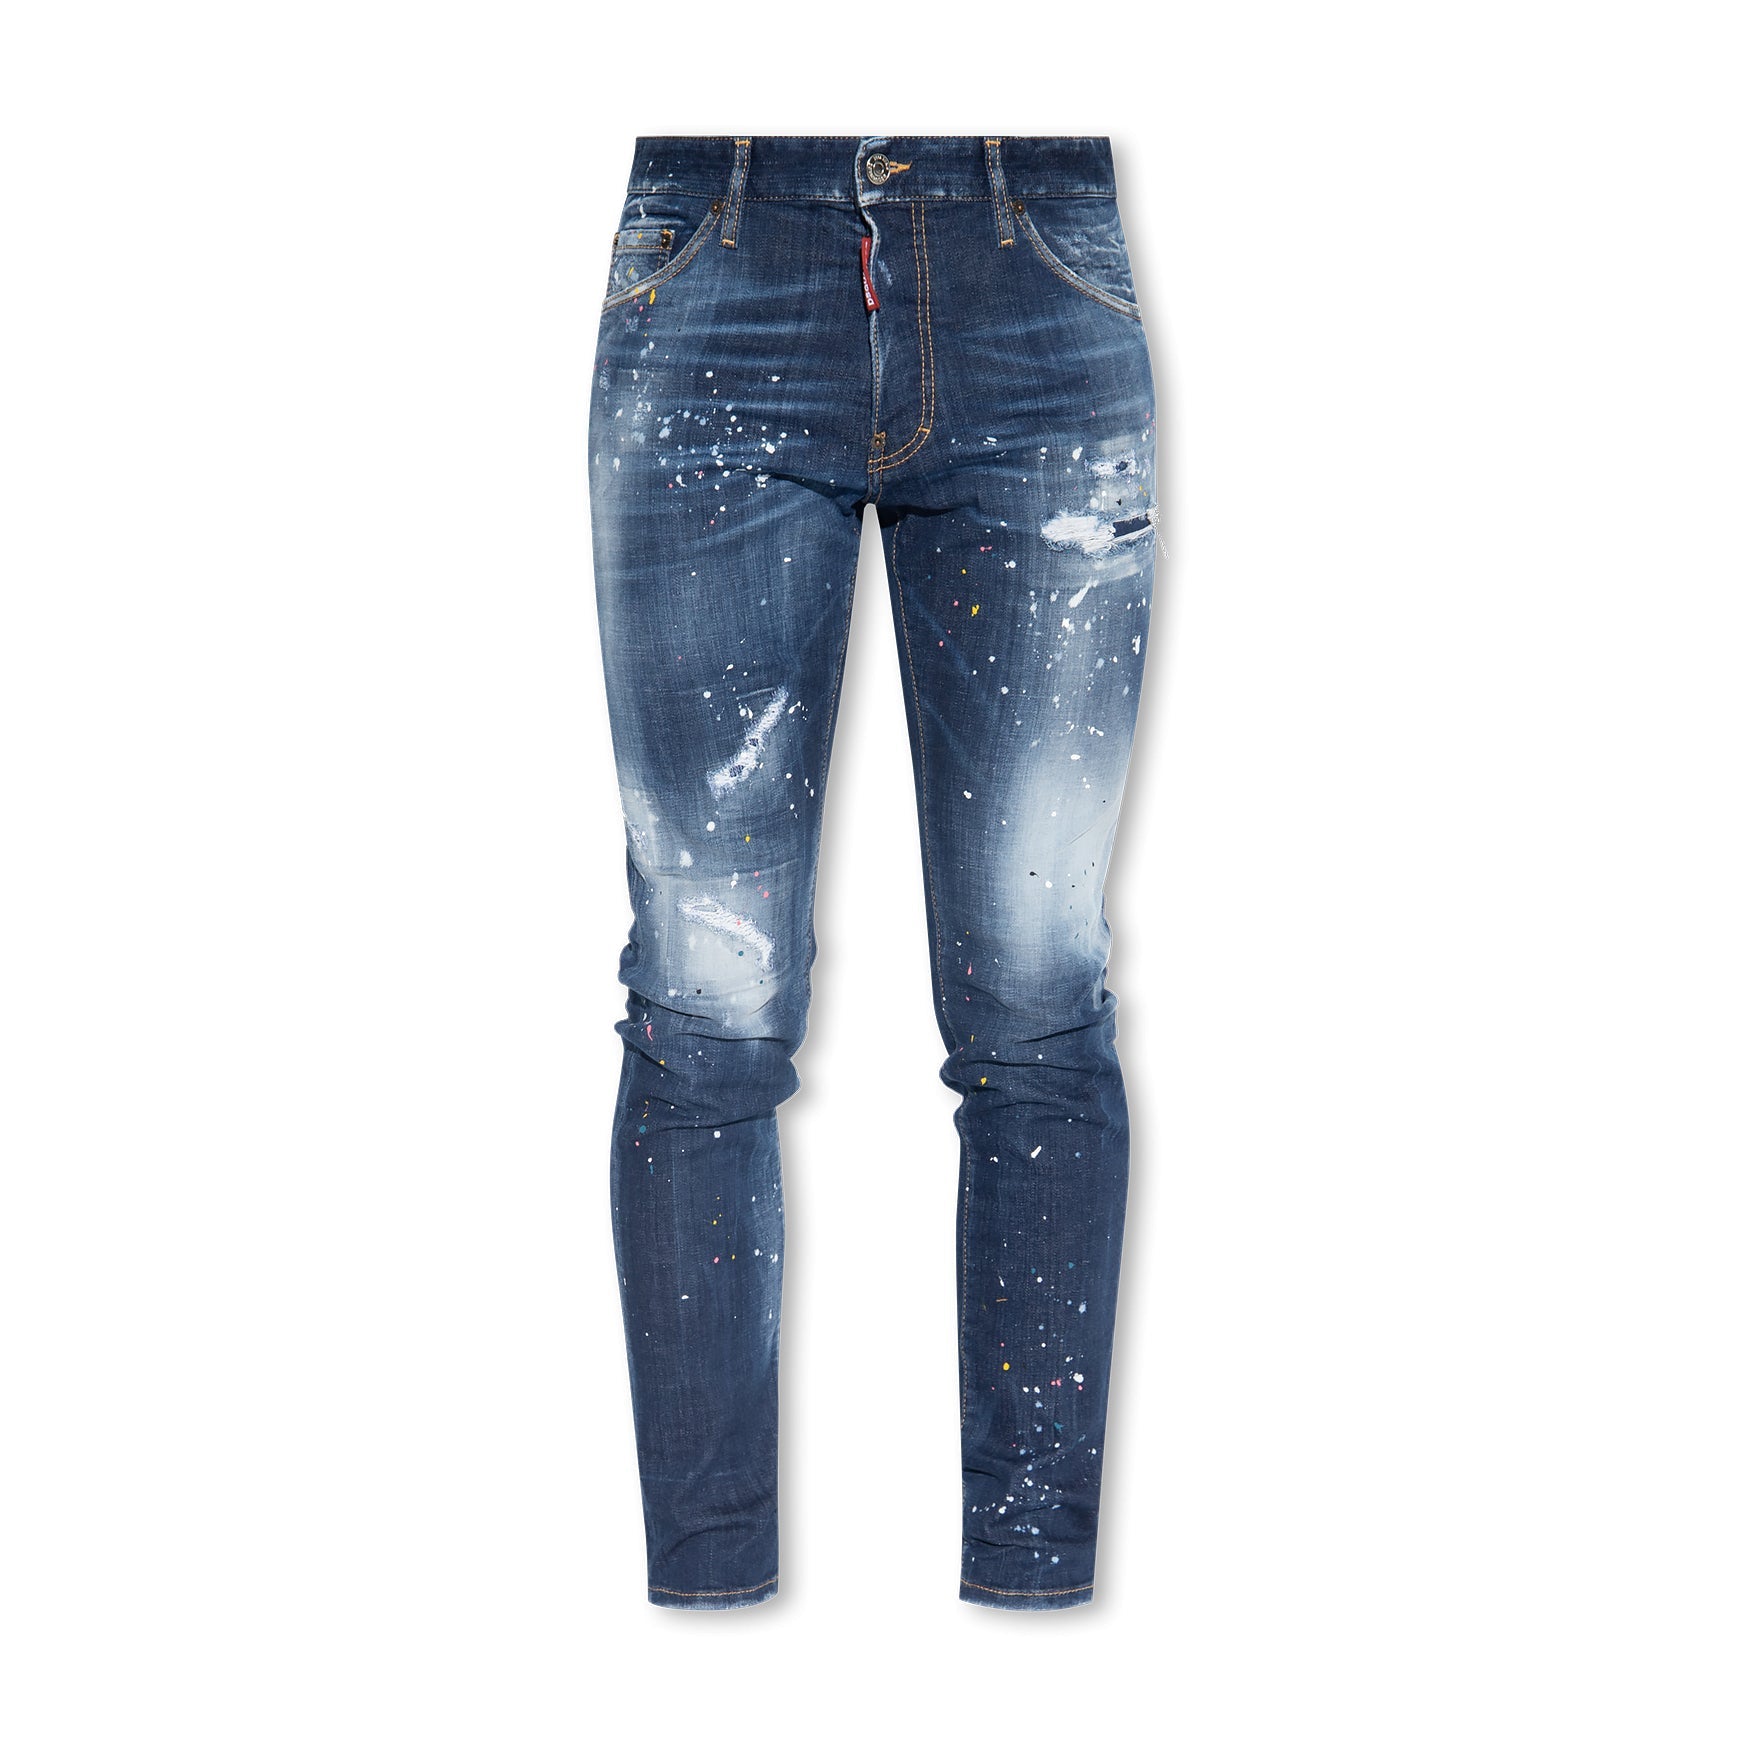 Dsquared2 Spotted Wash Jeans - 470 Navy Blue - Escape Menswear